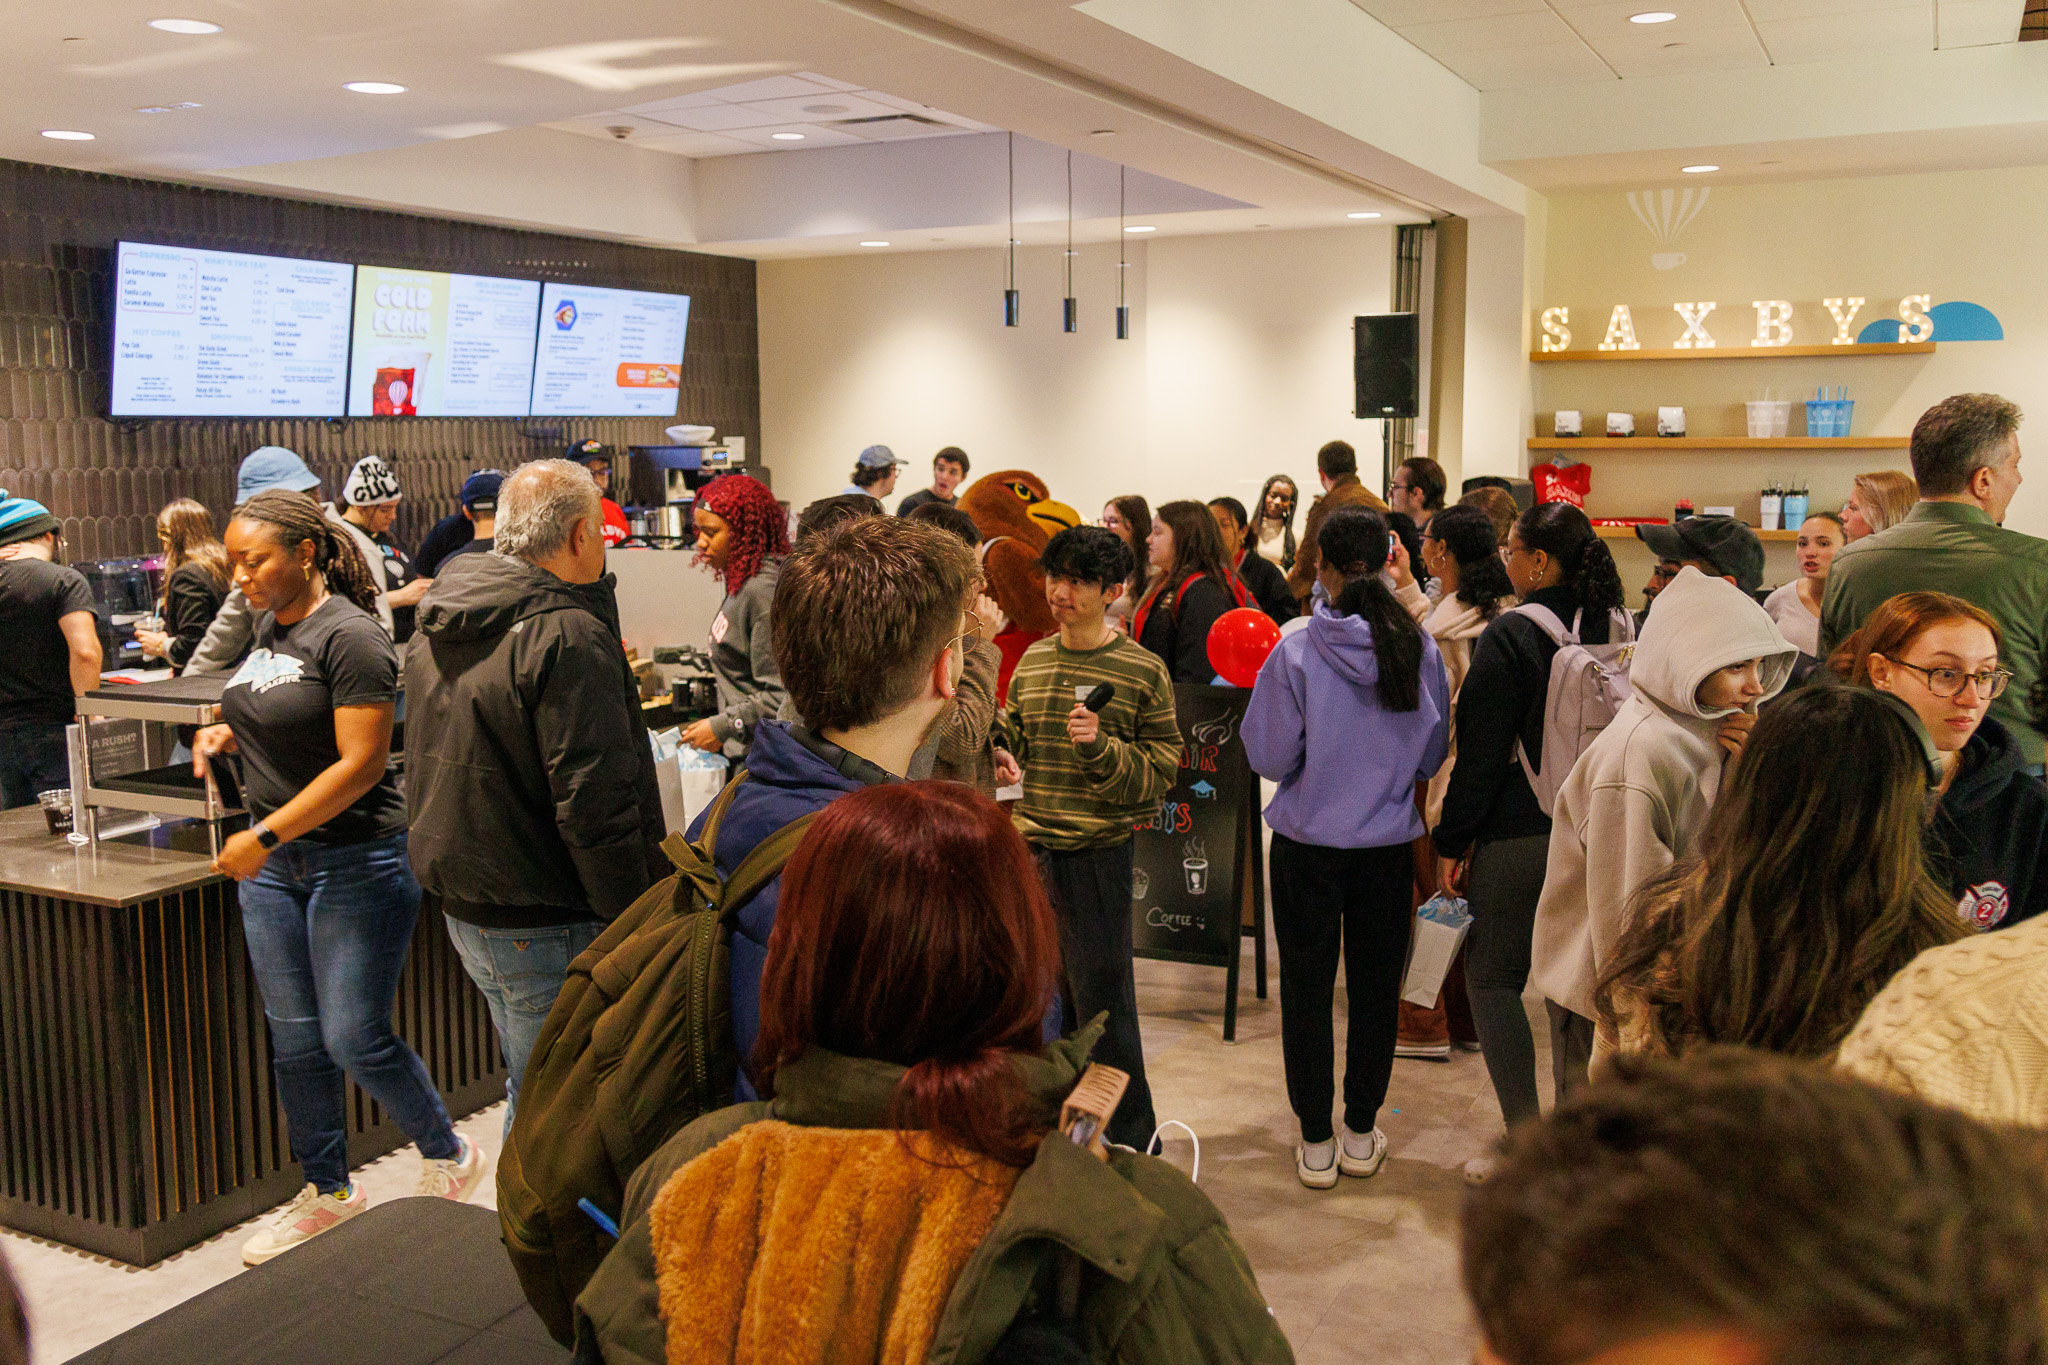 Students gathered on the first floor of the School of Business for the grand opening of Saxby's Cafe.
Sal DiMaggio | The Montclarion